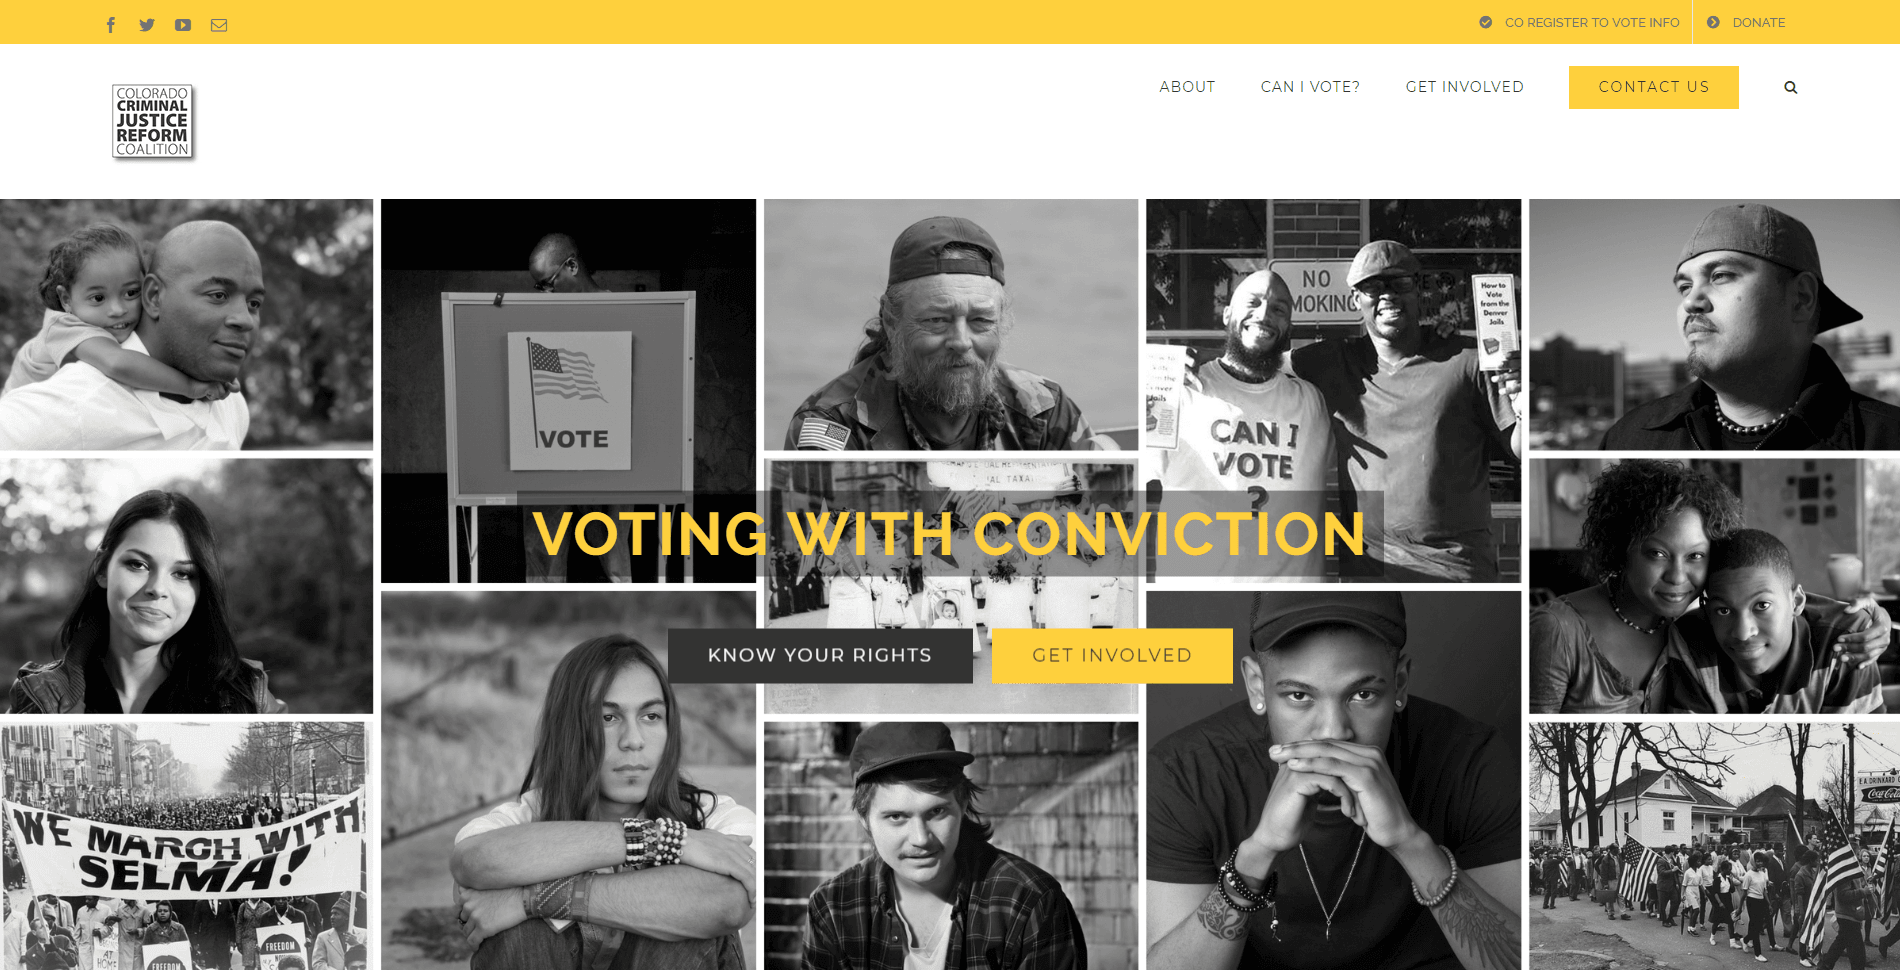 CCJRC Voting with Conviction homepage